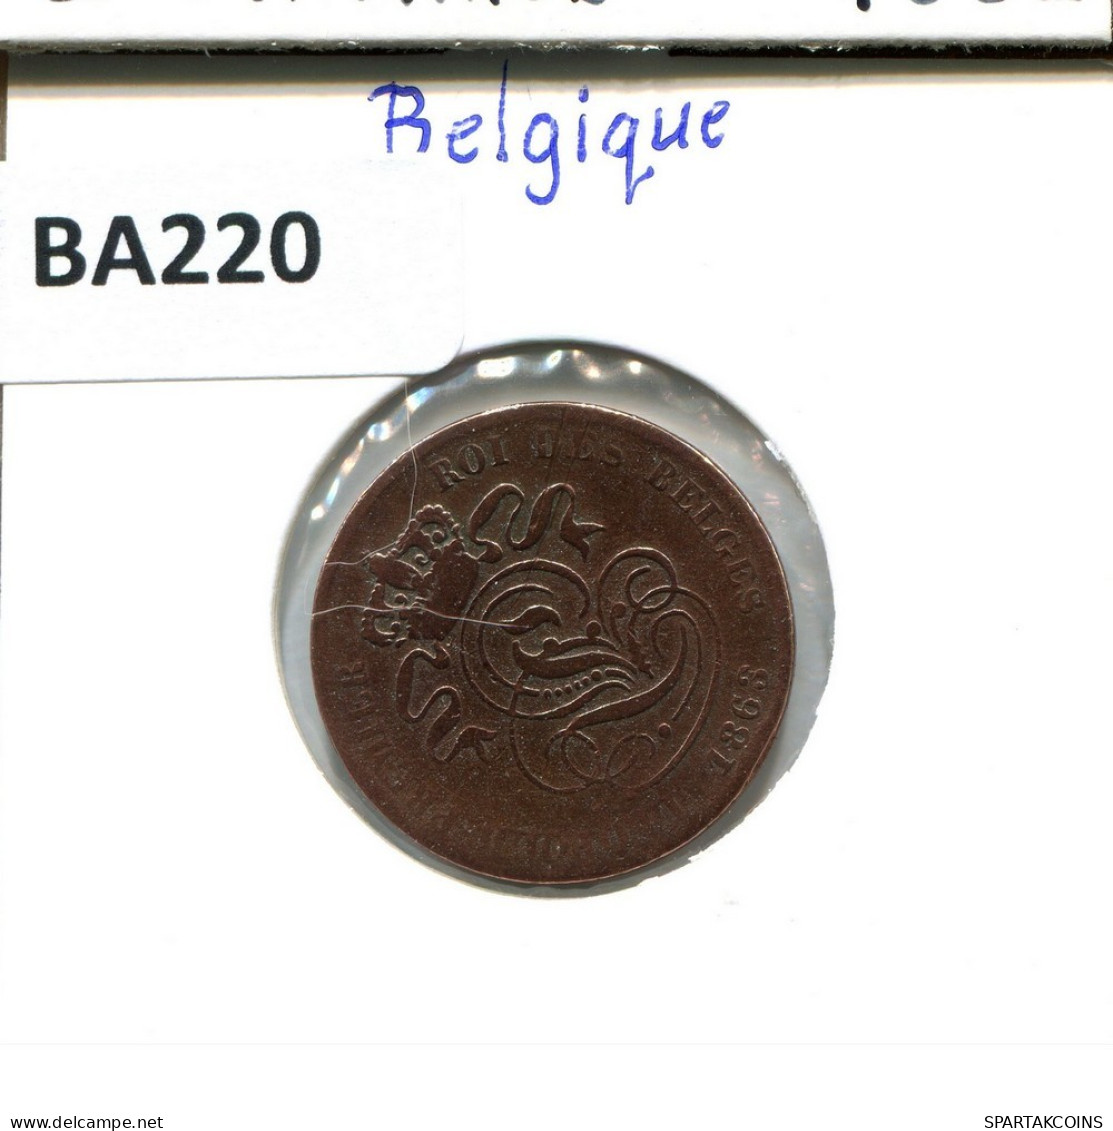 2 CENTIMES 1863 FRENCH Text BELGIUM Coin #BA220.U.A - 2 Cent